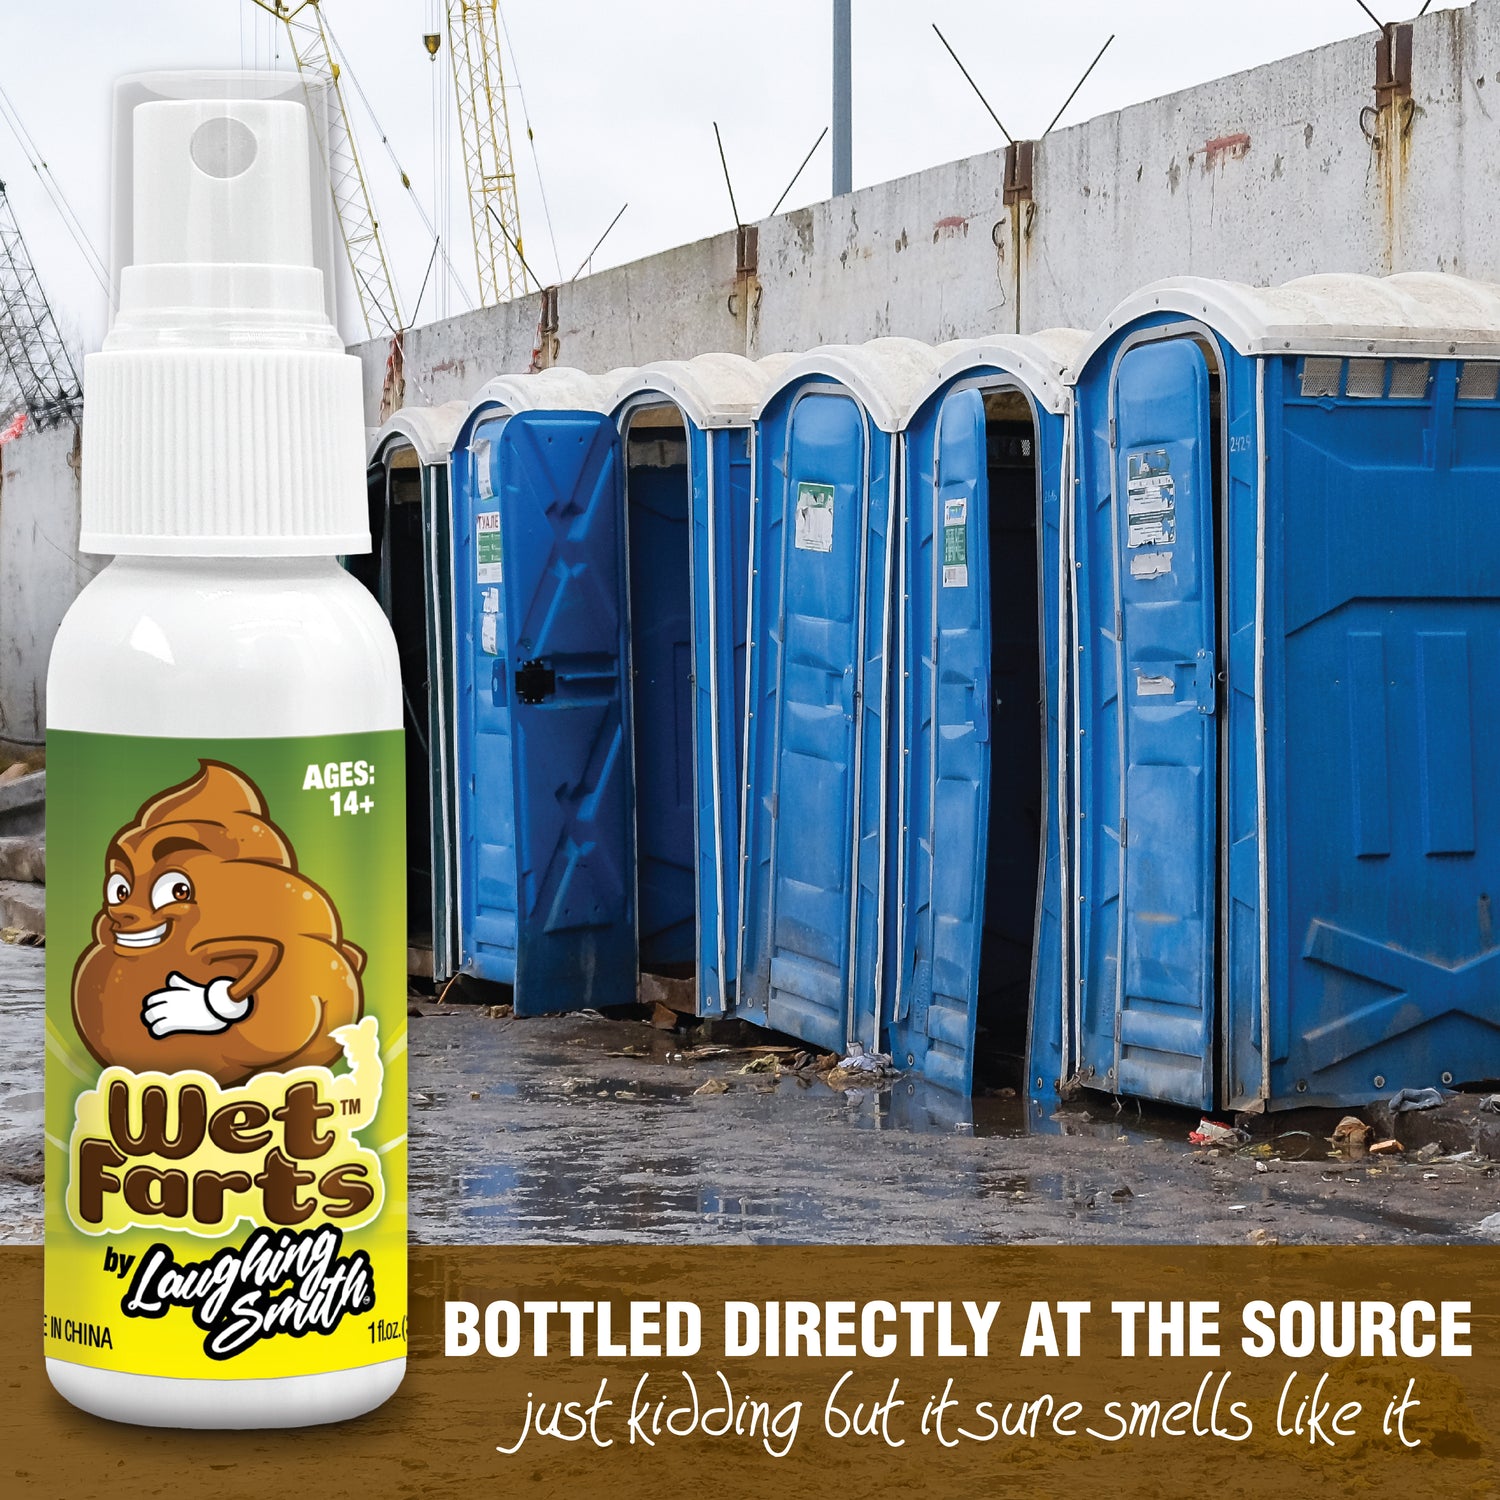  Potent Wet Poop - Highly Concentrated Fart Spray